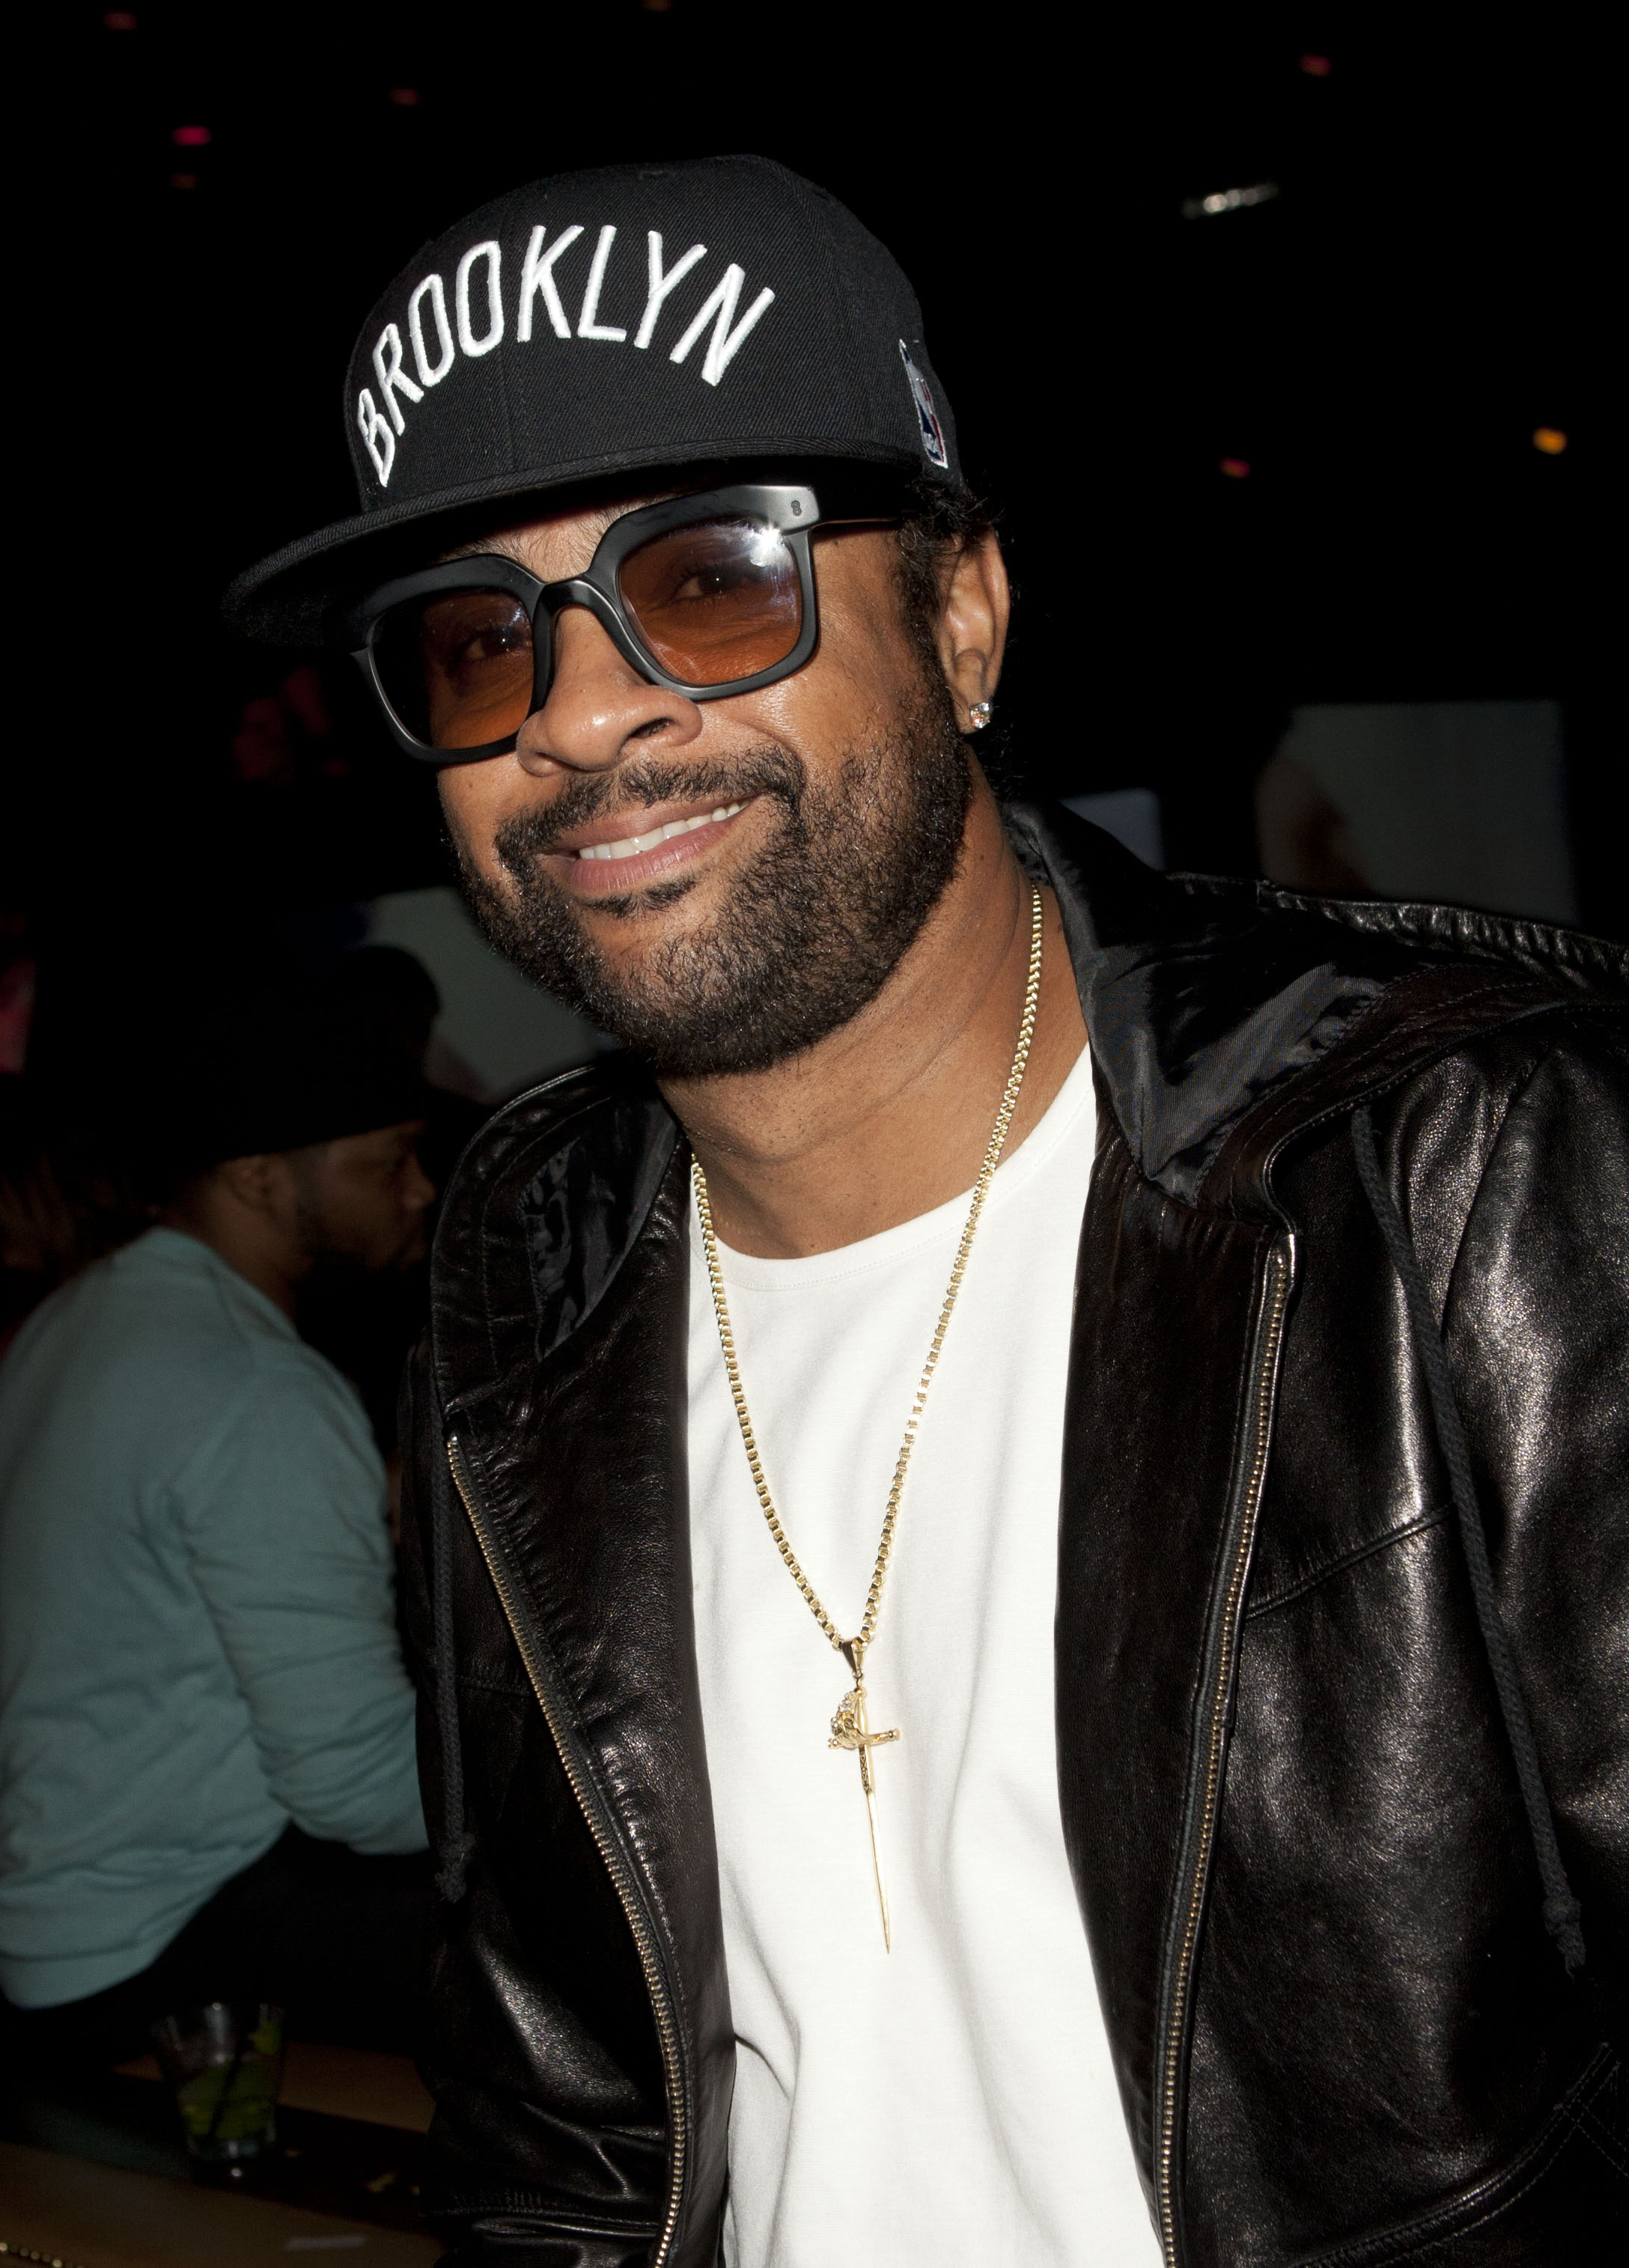 Recording artist Shaggy attends Republic Records GRAMMY Party on January 26, 2014 in Los Angeles, California.  (Photo by Michael Bezjian/WireImage)